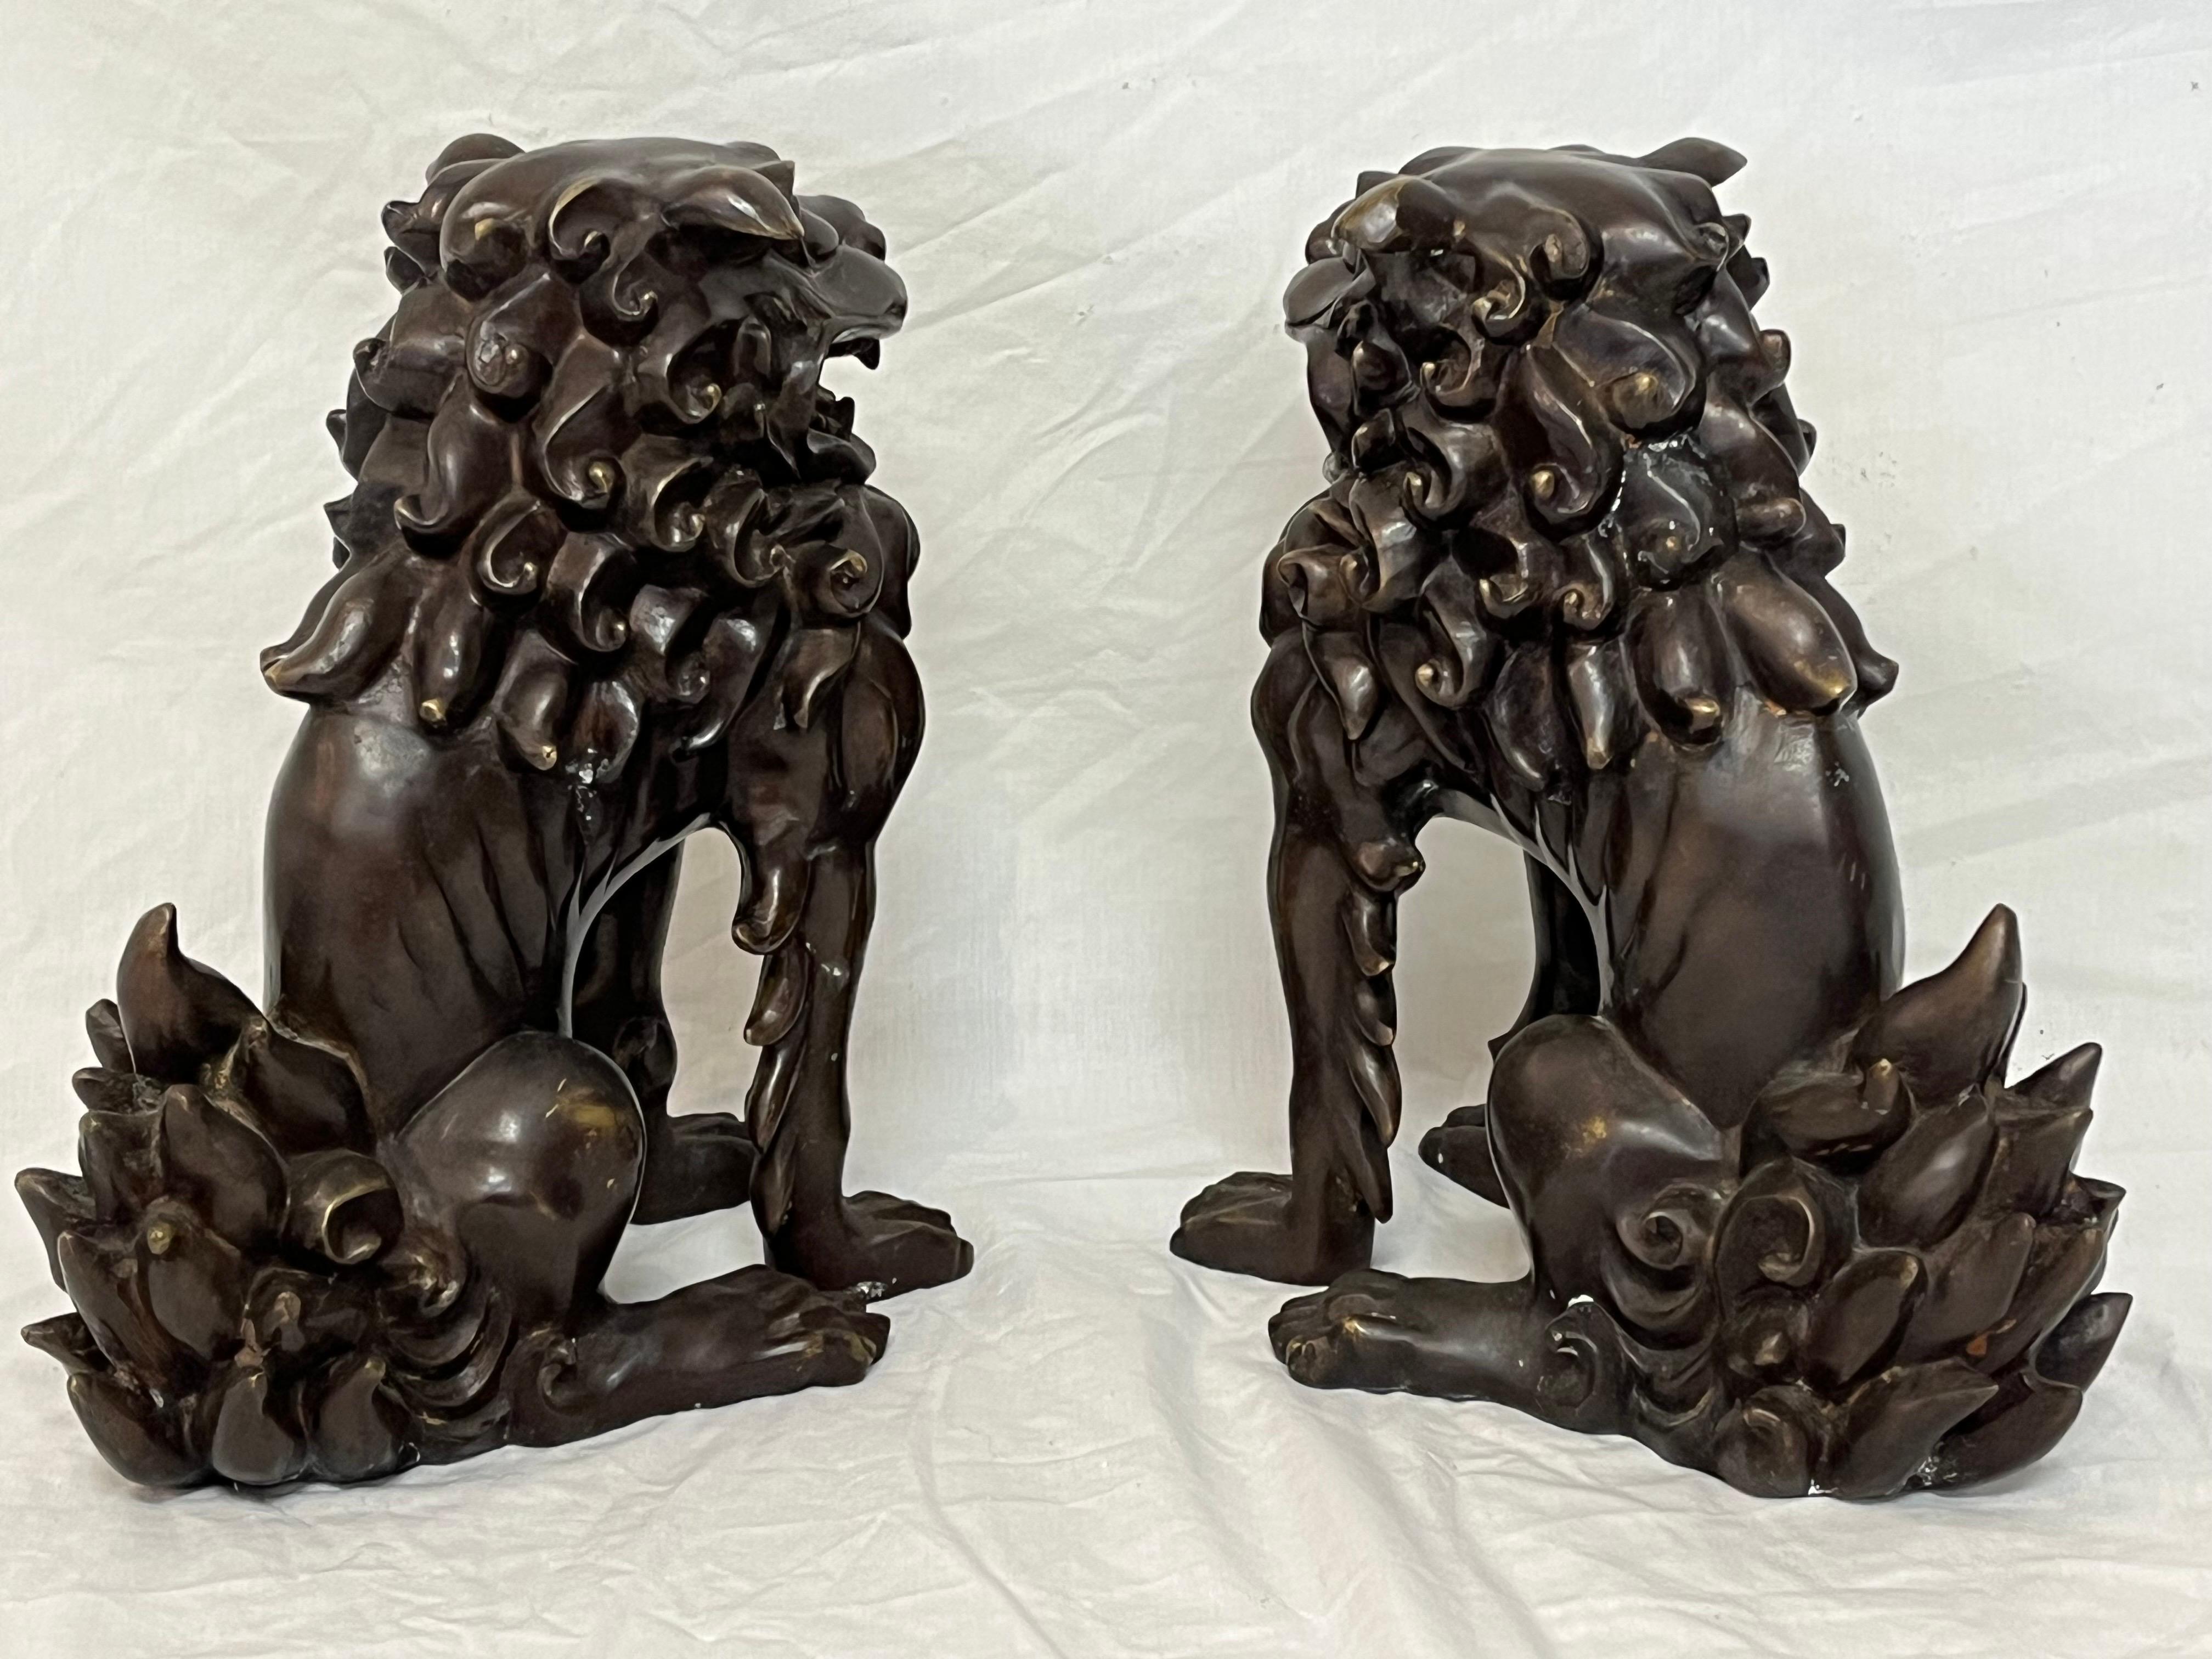 Large Pair of Bronze Lionized Shih Tzus Foo Dogs 20th Century Asian Sculptures In Good Condition For Sale In Atlanta, GA